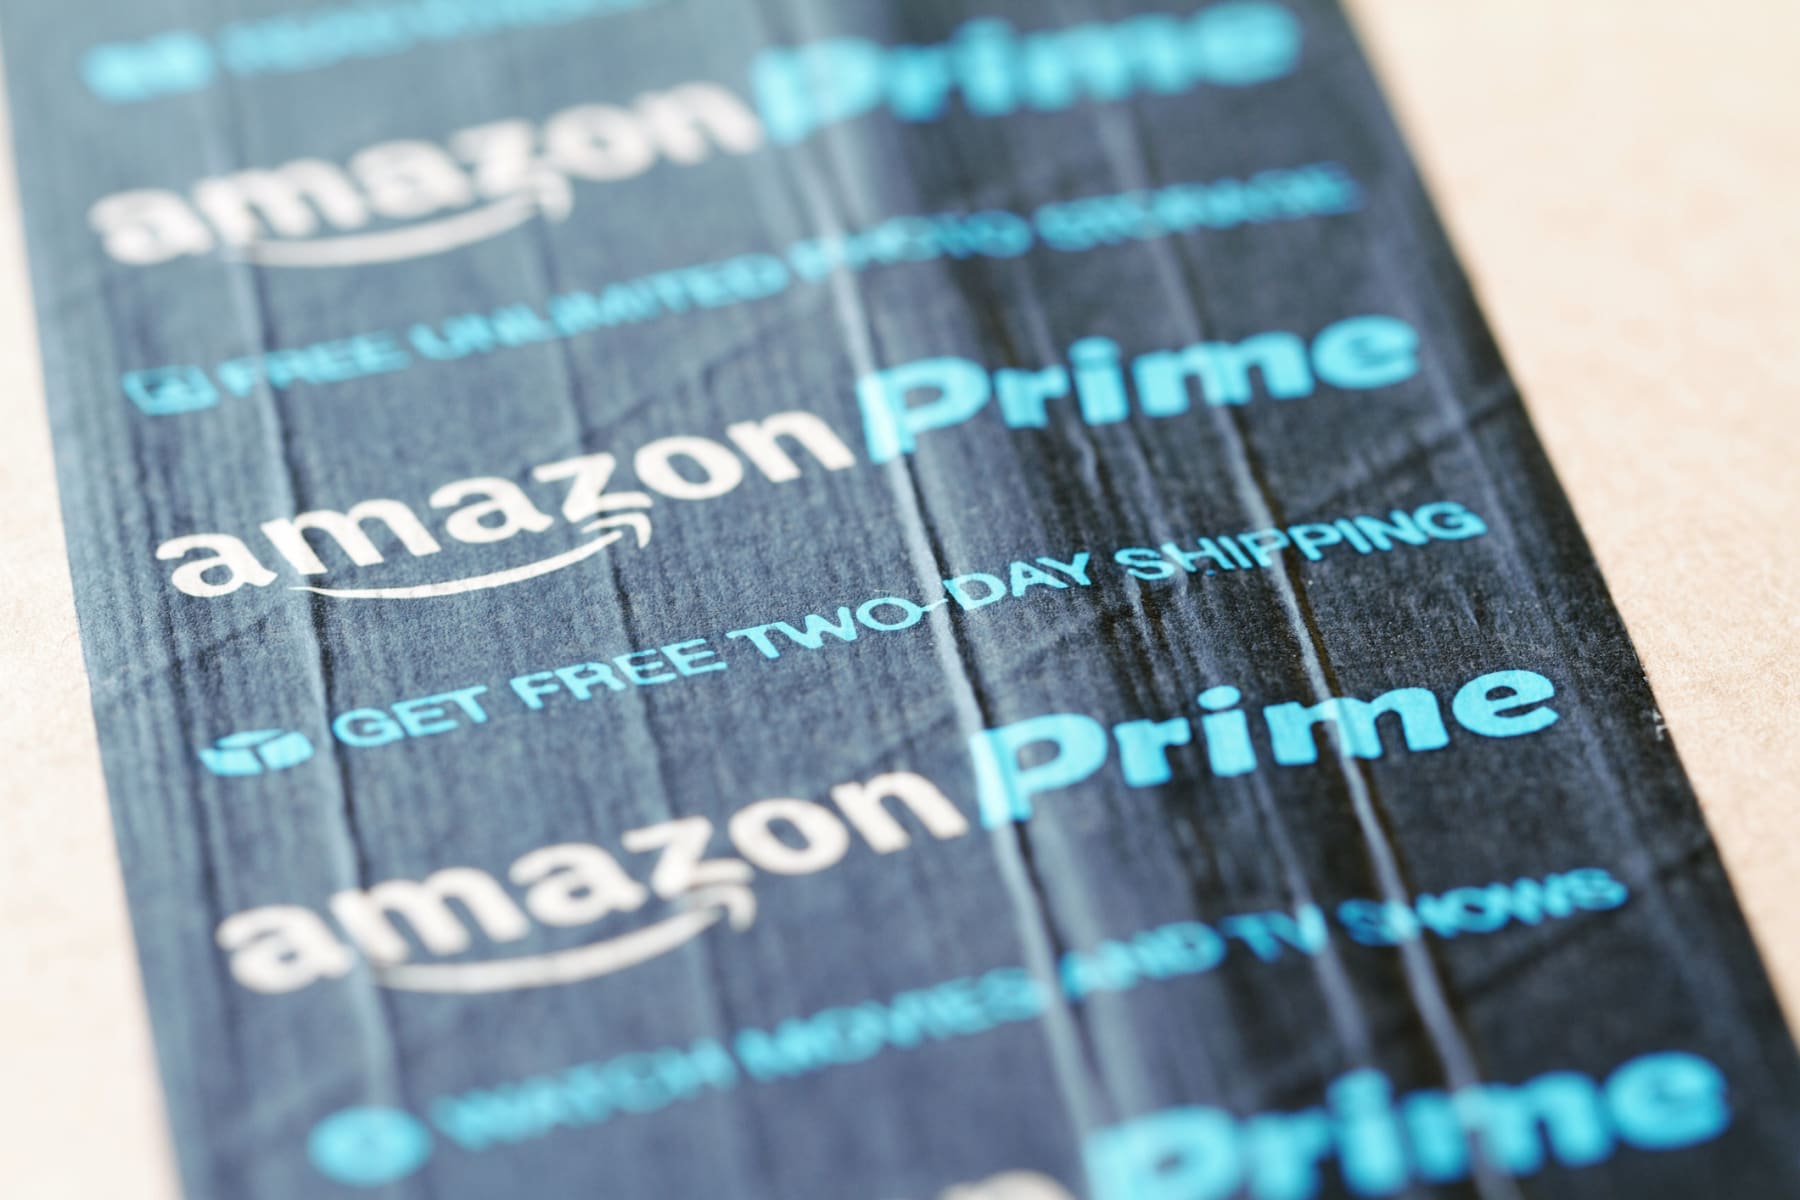 Amazon Prime tape shown on a package.